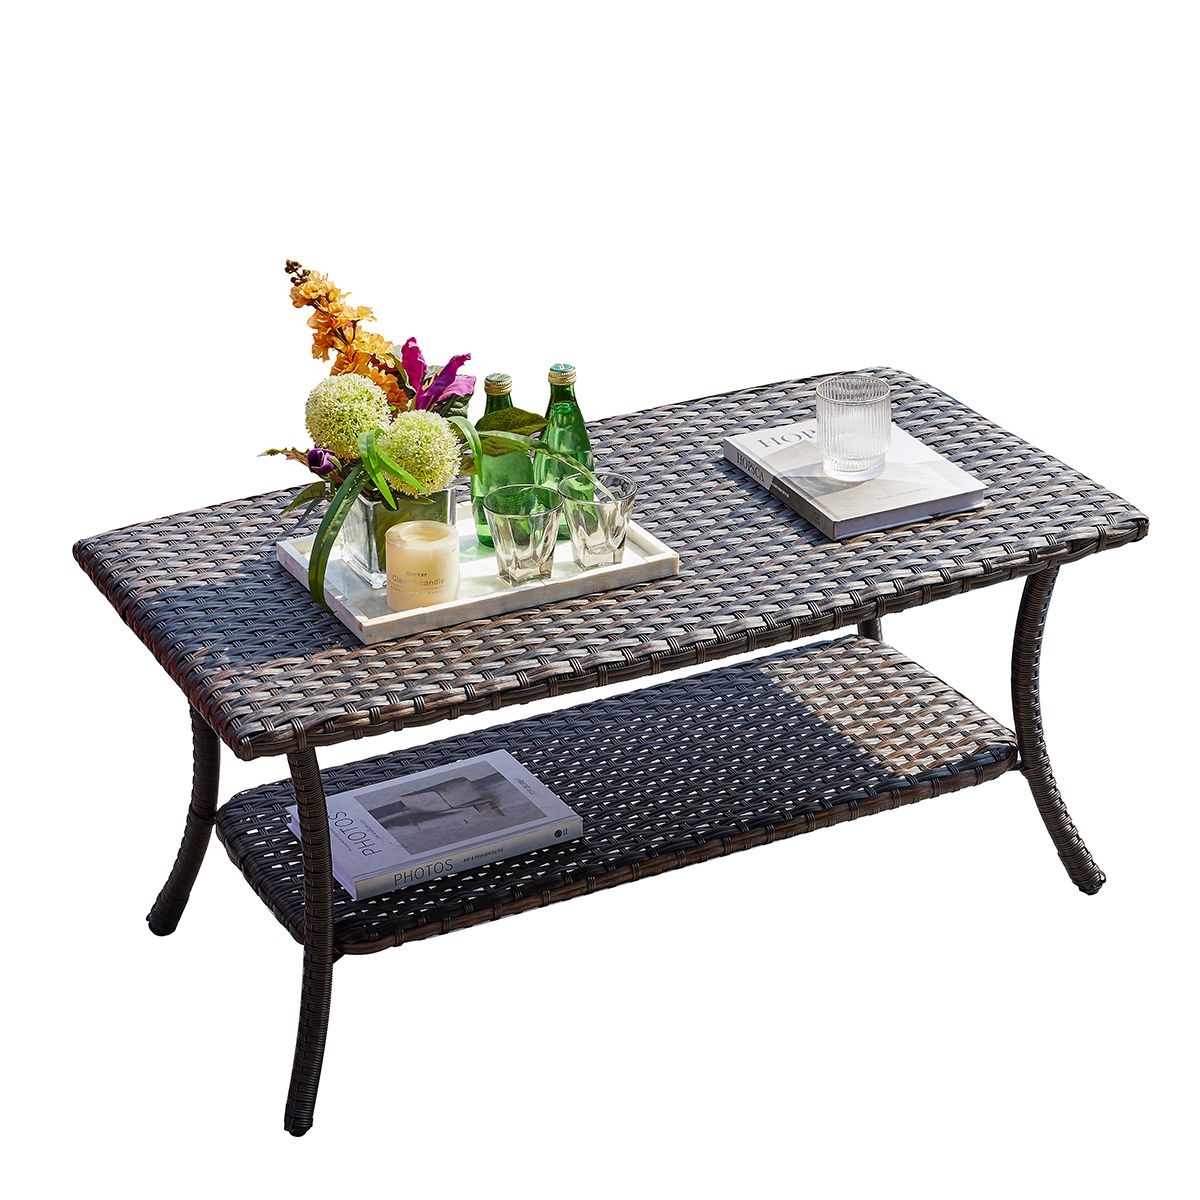 Parkwell Outdoor Wicker Rectangular Coffee Table With 2 Tier Storage Shelf  And Wicker Table Top, Metal Frame – Walmart Regarding Outdoor 2 Tiers Storage Metal Coffee Tables (View 6 of 15)